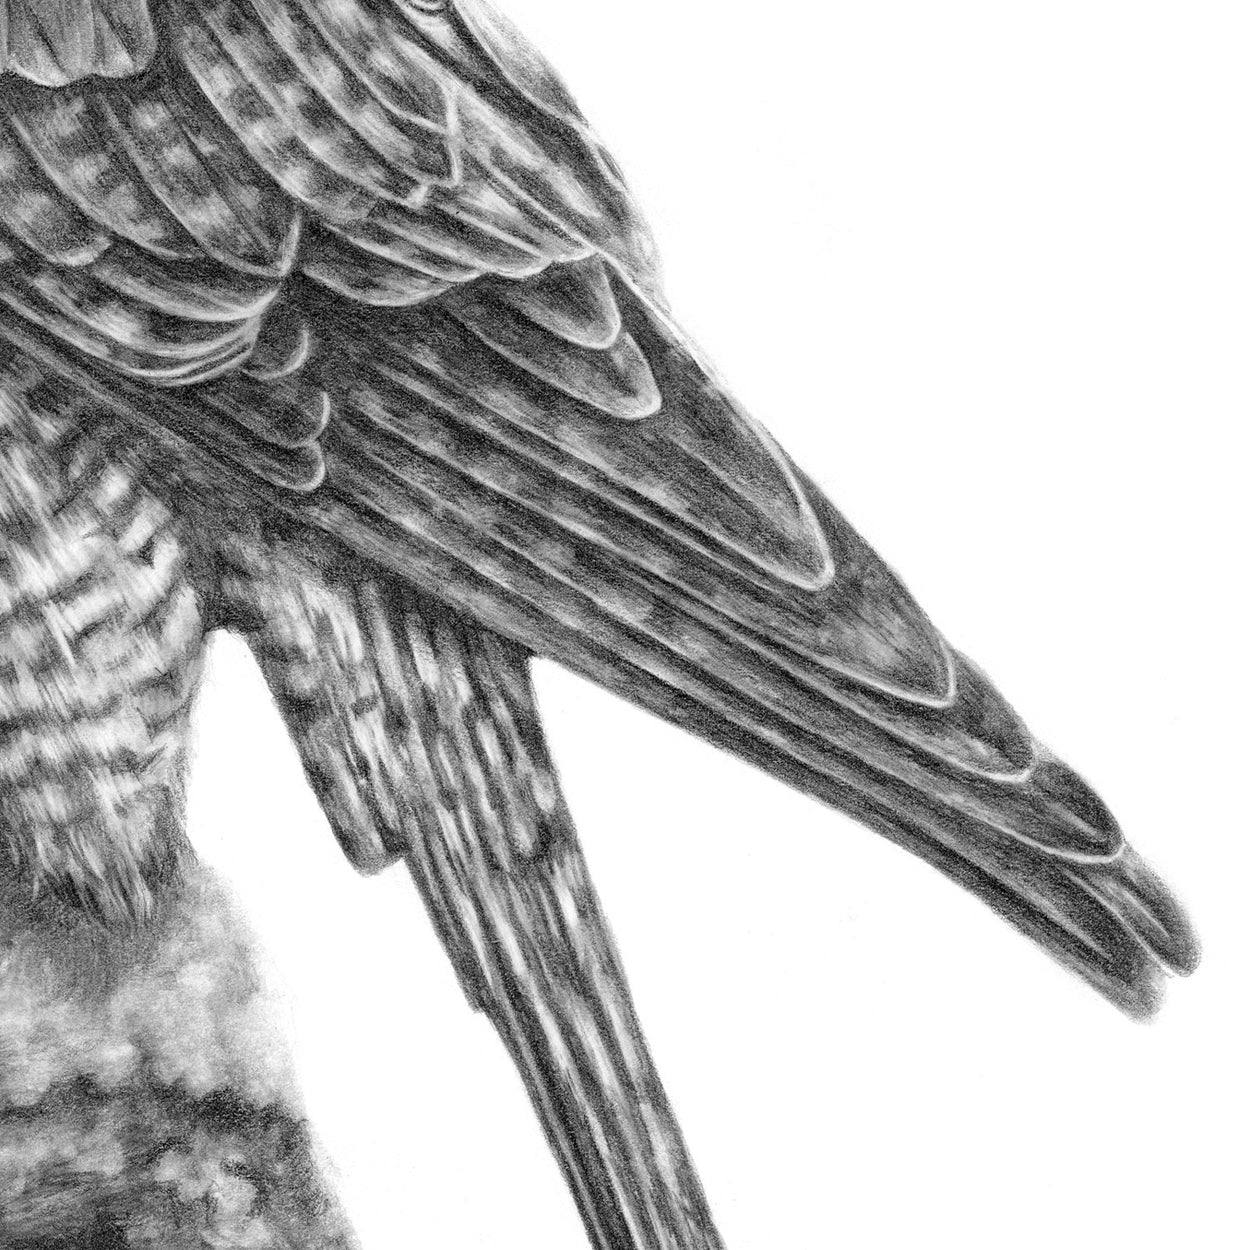 Peregrine Drawing Close-up 3 - The Thriving Wild